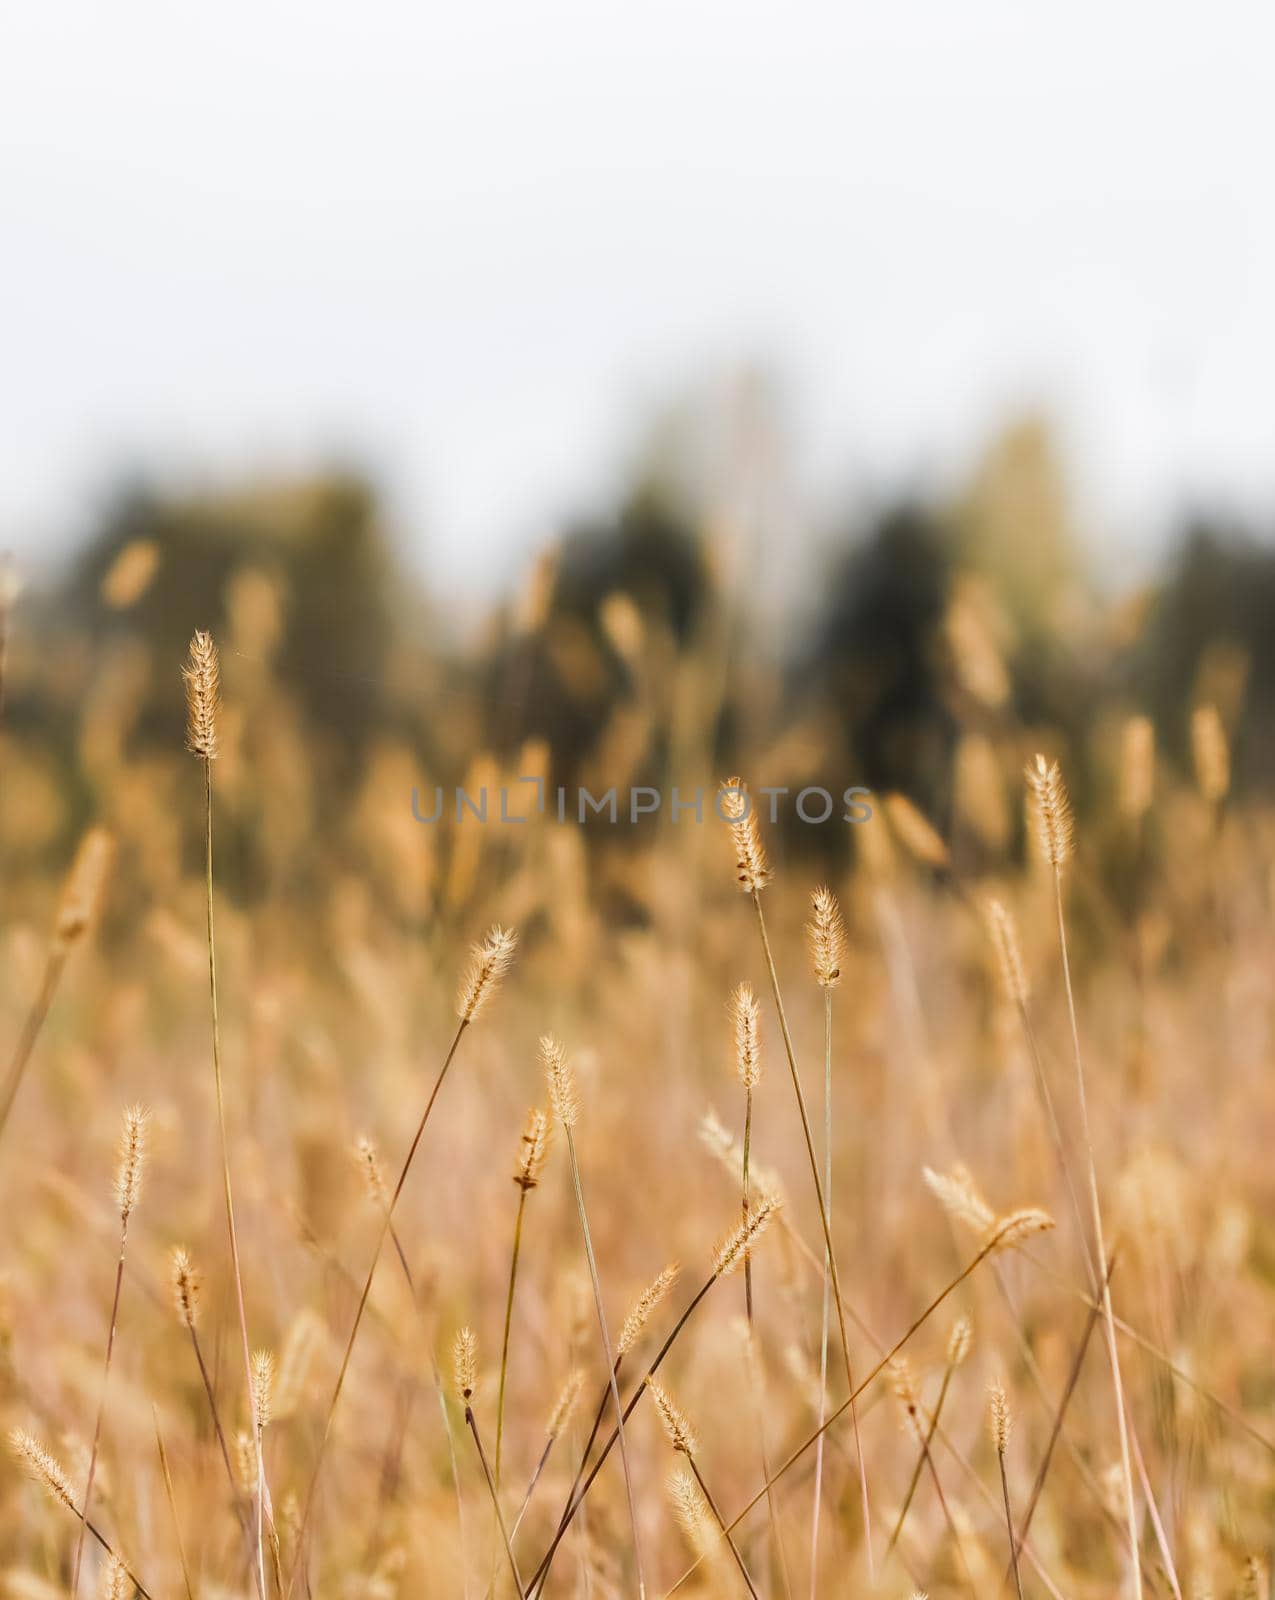 Golden spikelets of plants on an autumn field..Natural background